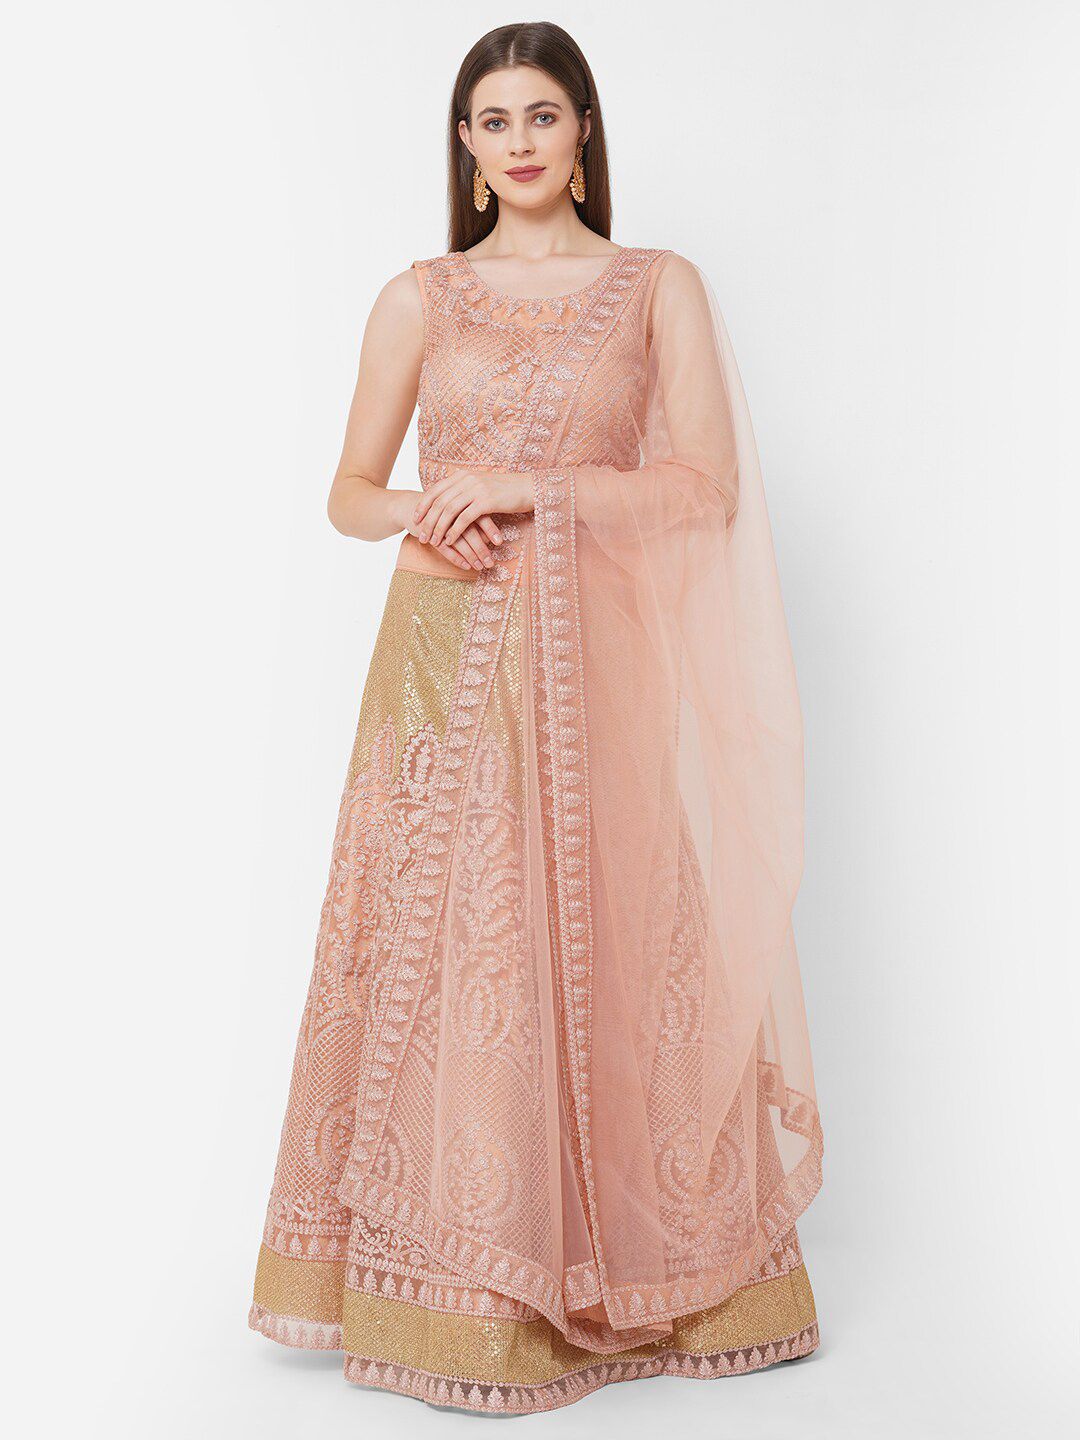 RedRound Peach-Coloured & Gold-Toned Embroidered Thread Work Semi-Stitched Lehenga & Unstitched Blouse With Price in India